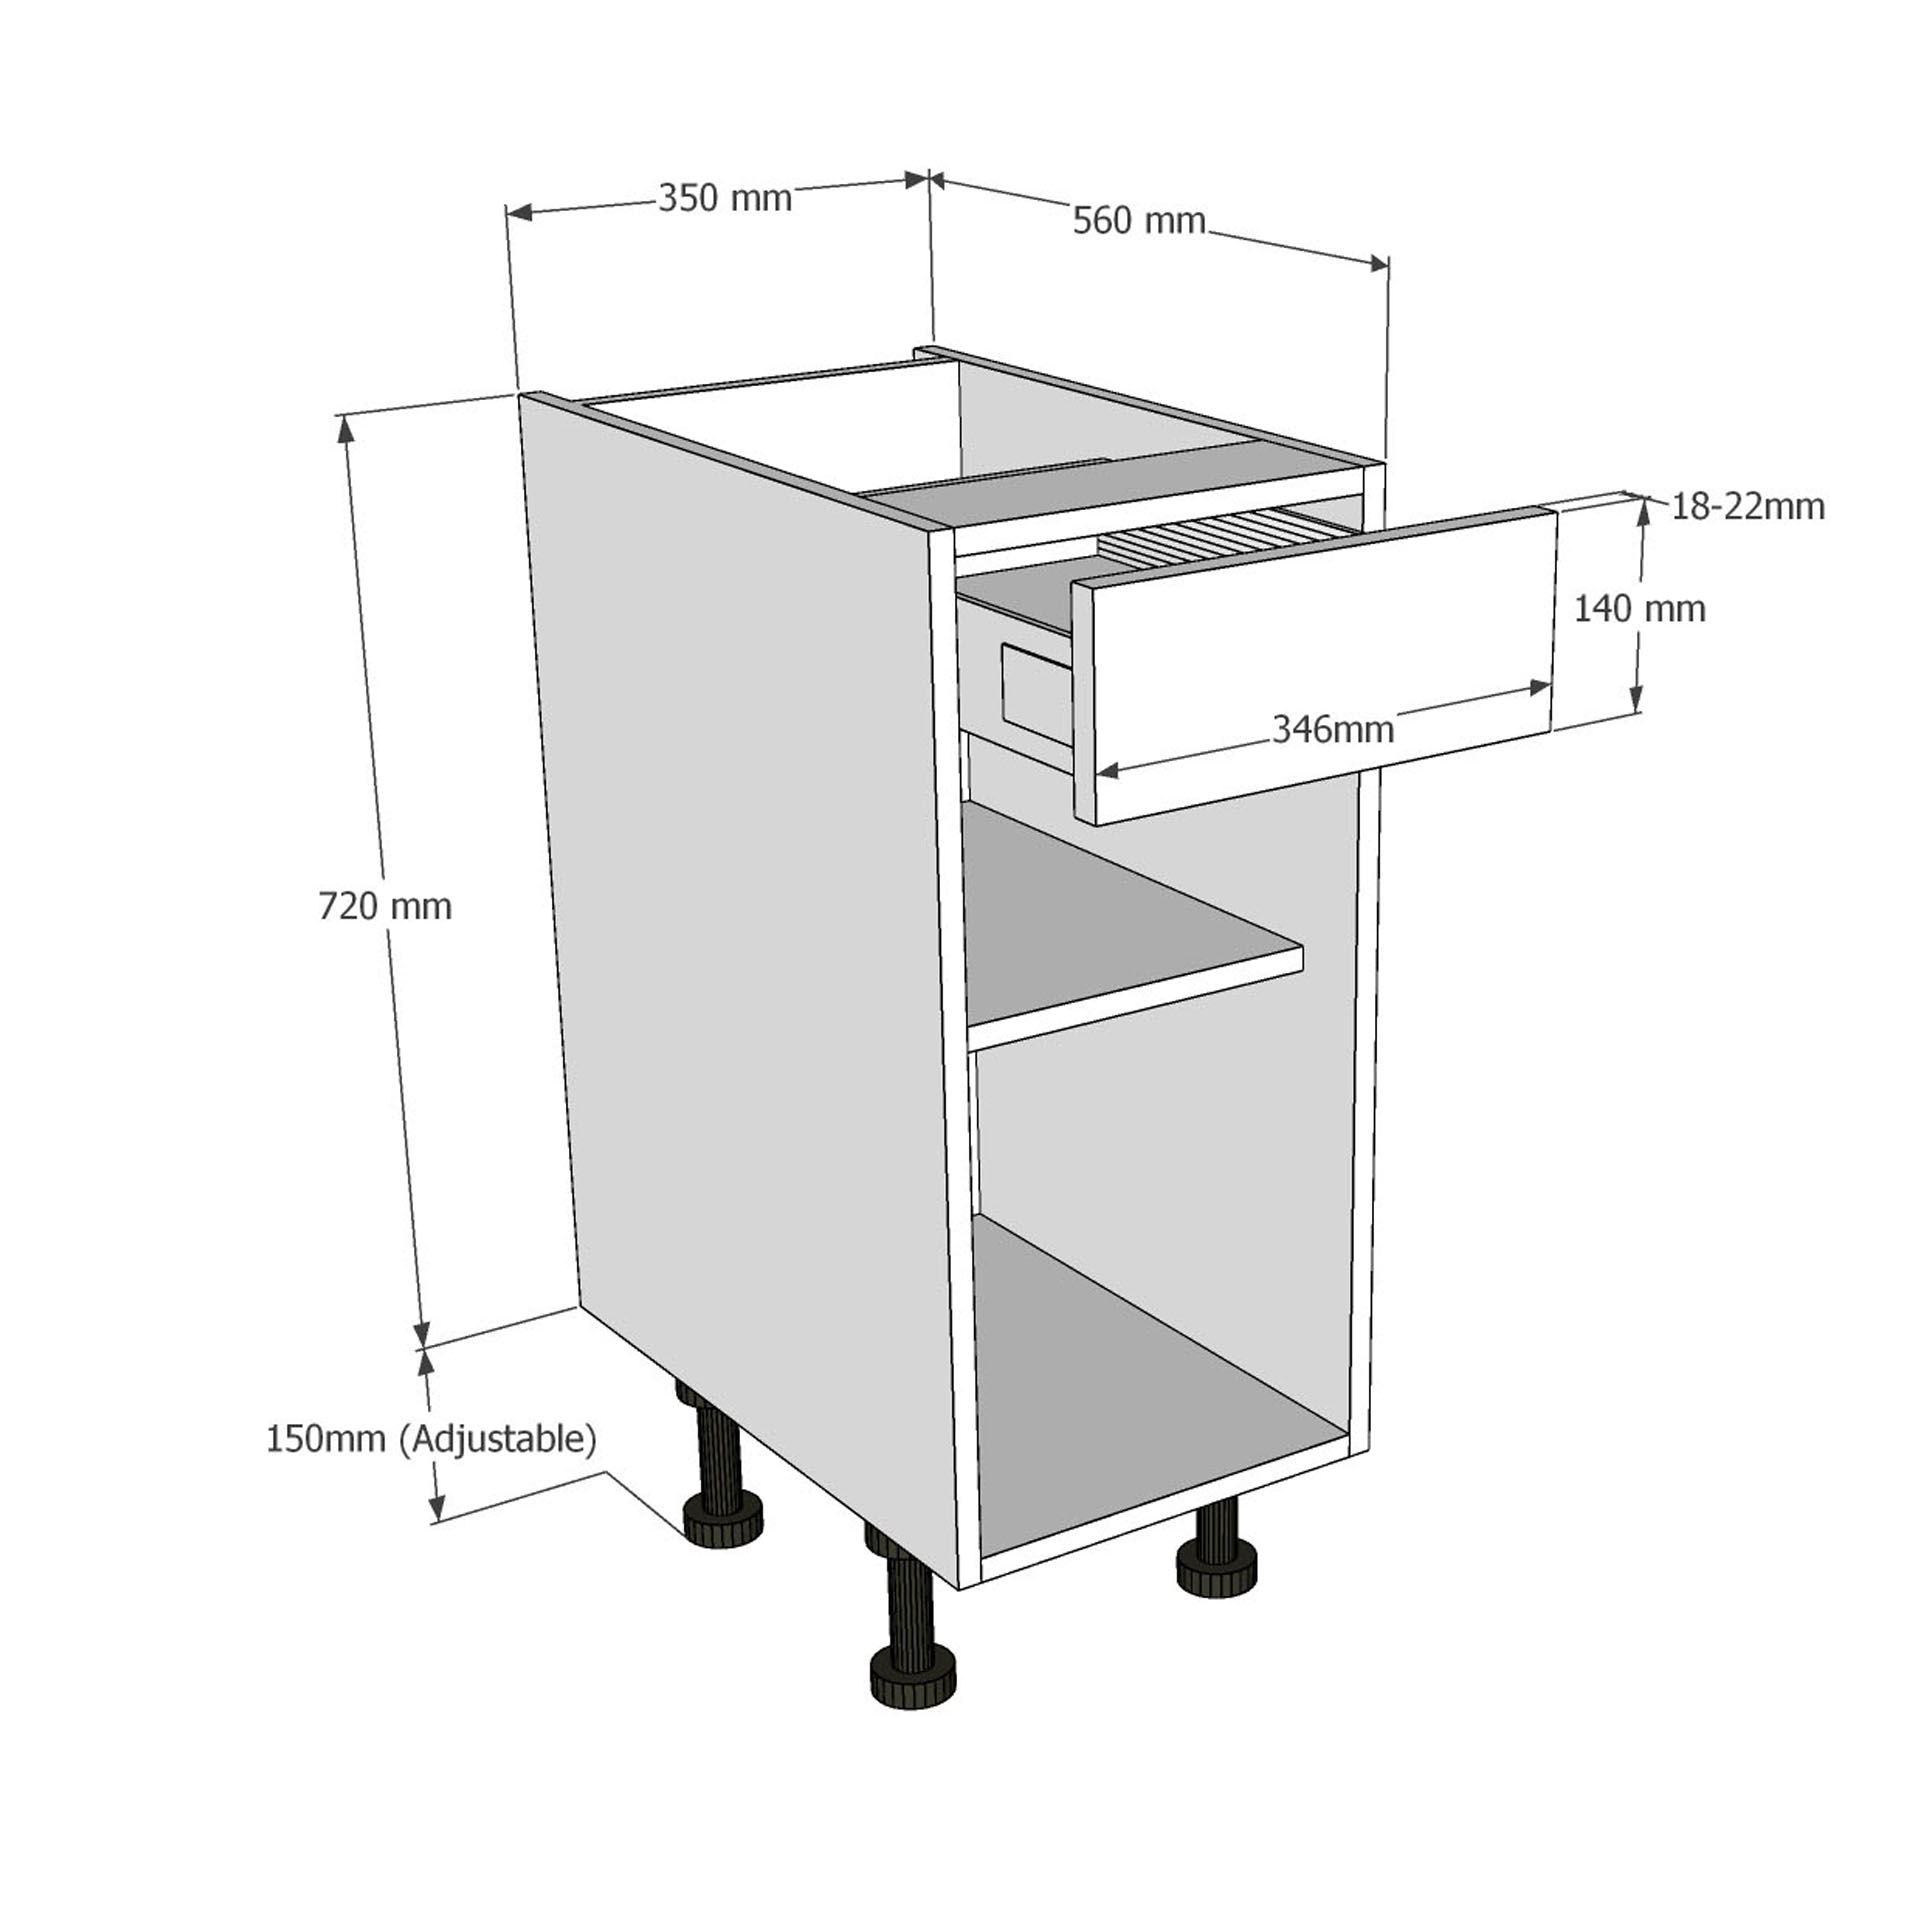 350mm Open Base Unit with Top Drawer Dimensions